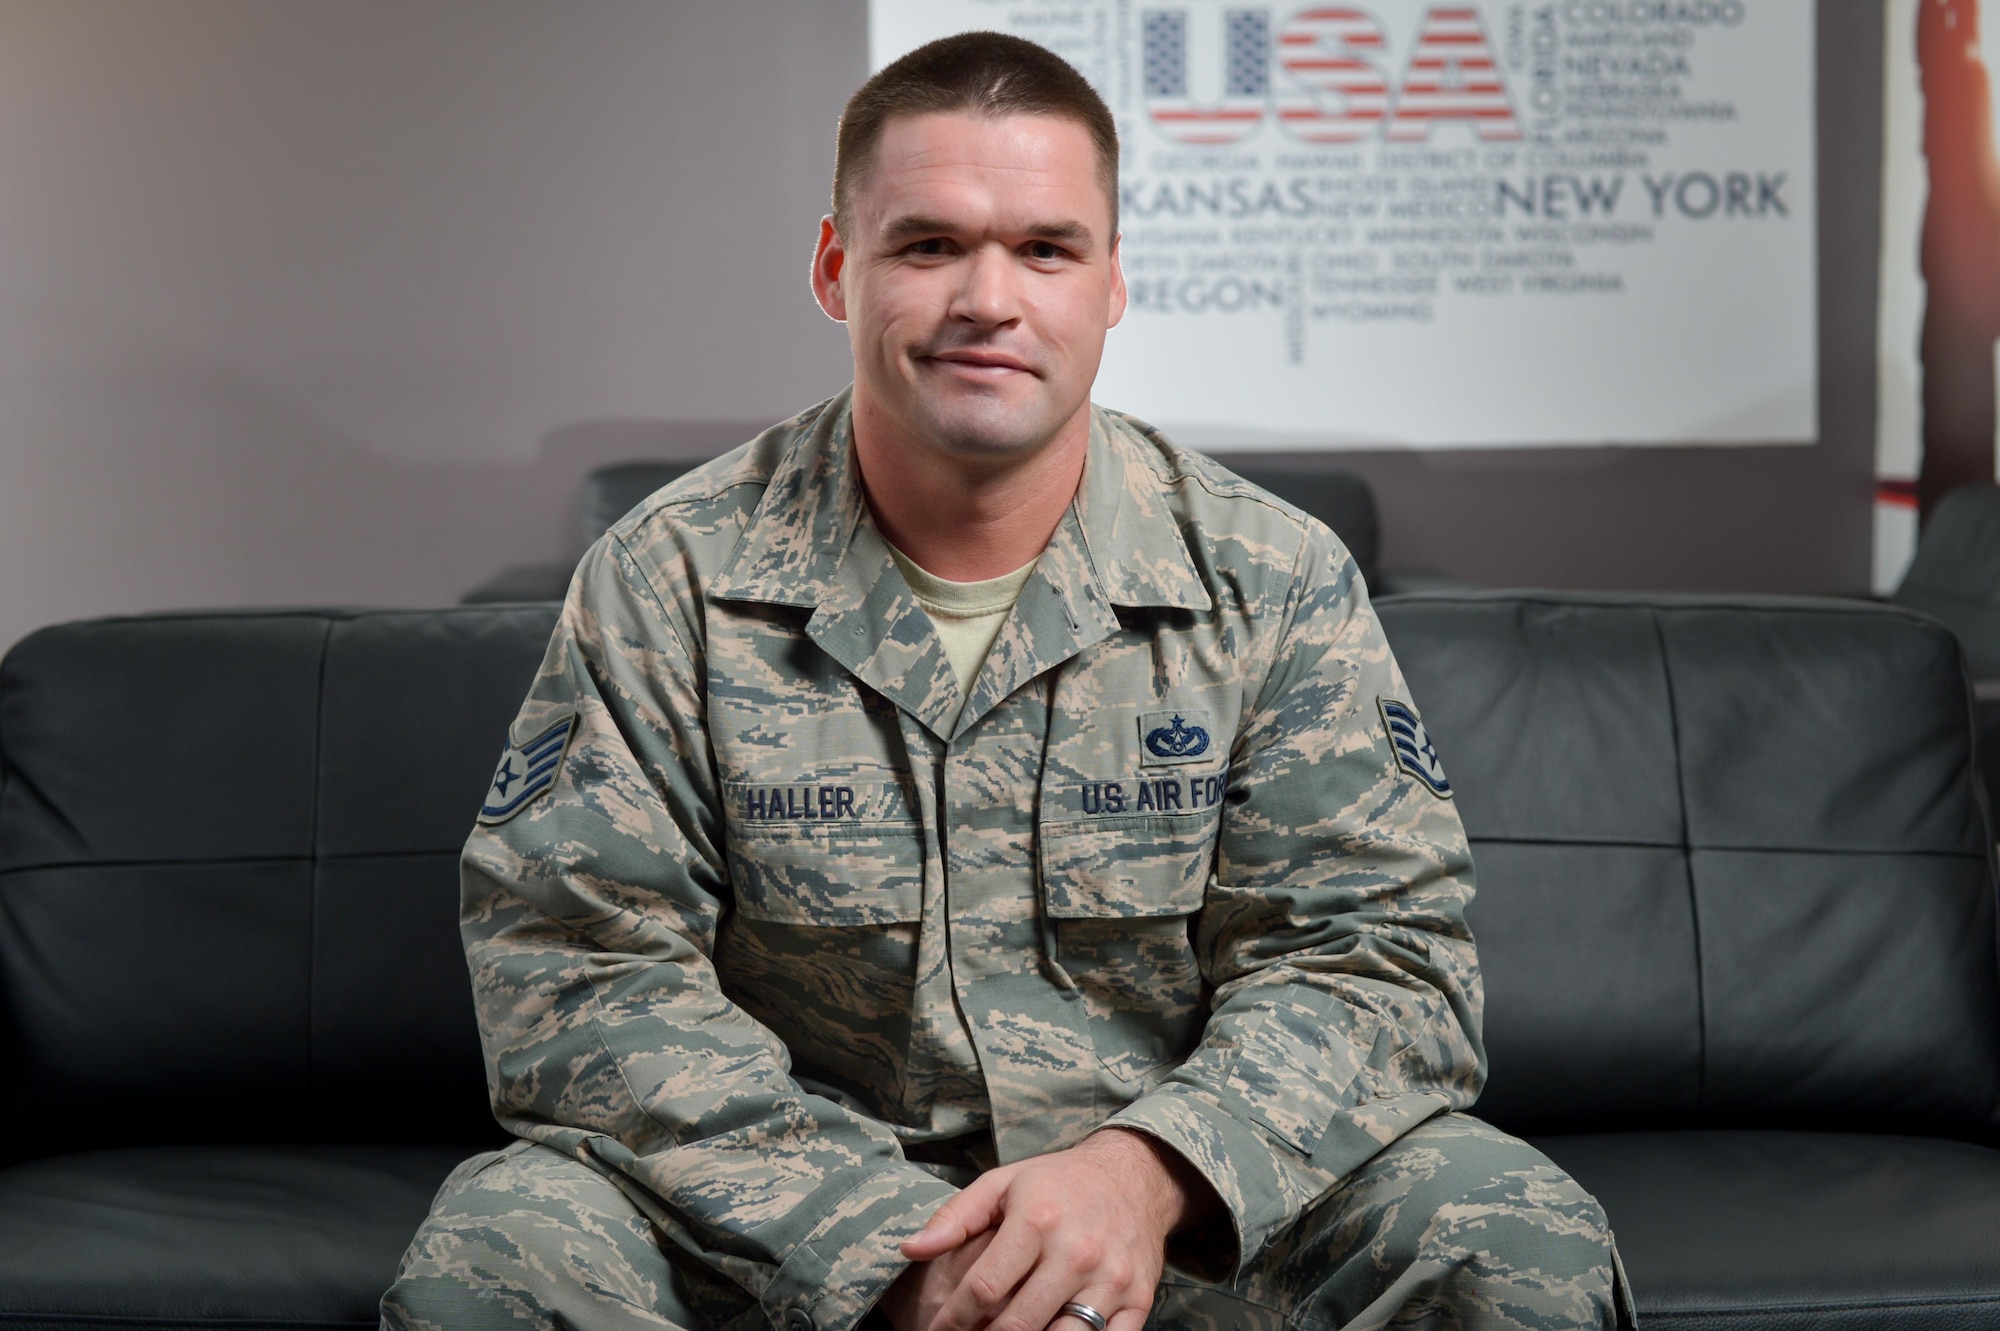 Staff Sgt. Jordan, 380th Expeditionary Civil Engineer Squadron engineer, poses for a photograph in a facility he remodeled at an undisclosed location in Southwest Asia, March 14, 2017. Jordan volunteered more than 250 hours to complete the project which is now the new 380th Air Expeditionary Wing Airman Ministry Center. The facility is projected to be used more than 72,000 times annually. (U.S. Air Force photo/Senior Airman Tyler Woodward)